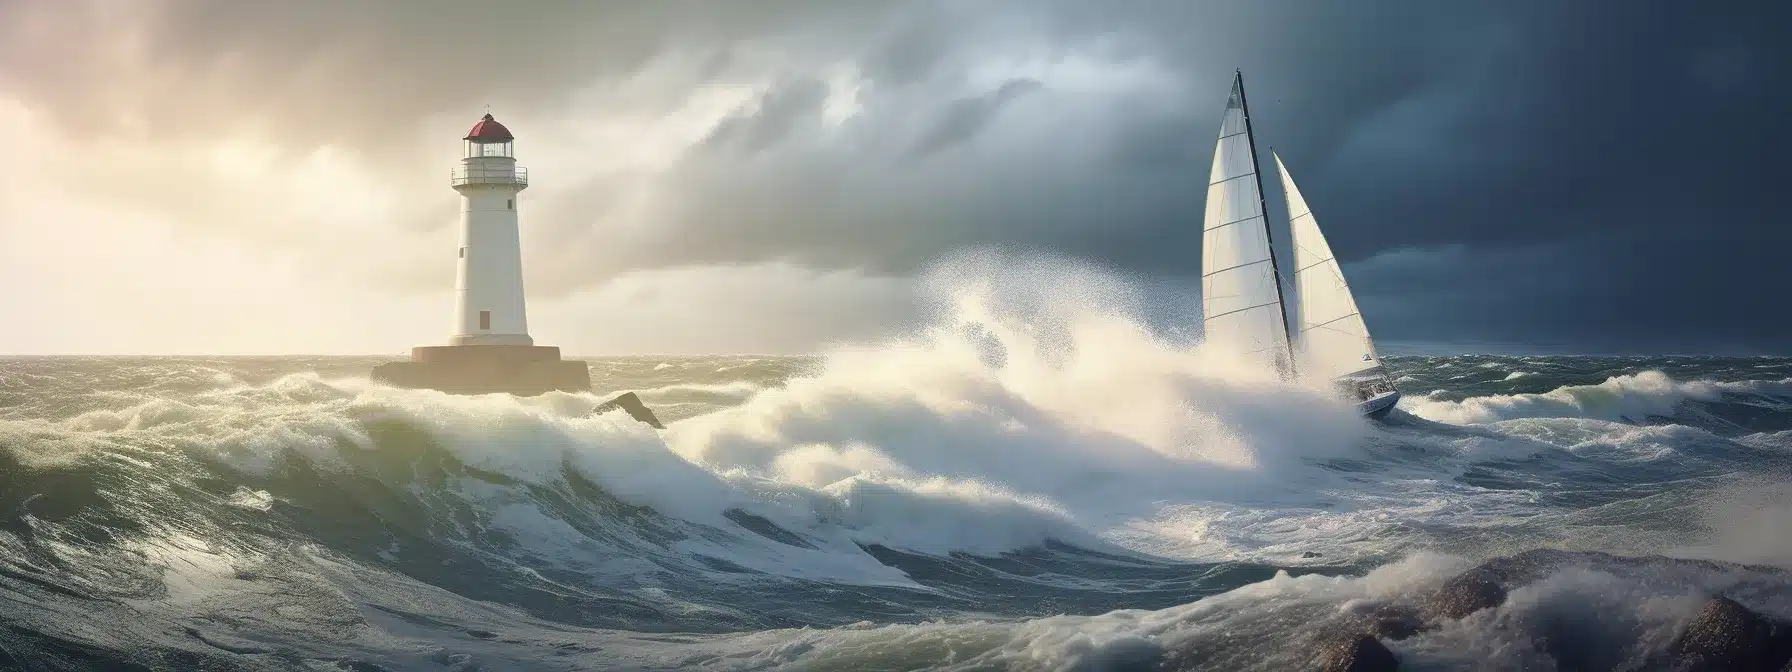 A Sailboat Navigating Through A Stormy Sea With A Lighthouse Guiding Its Way.